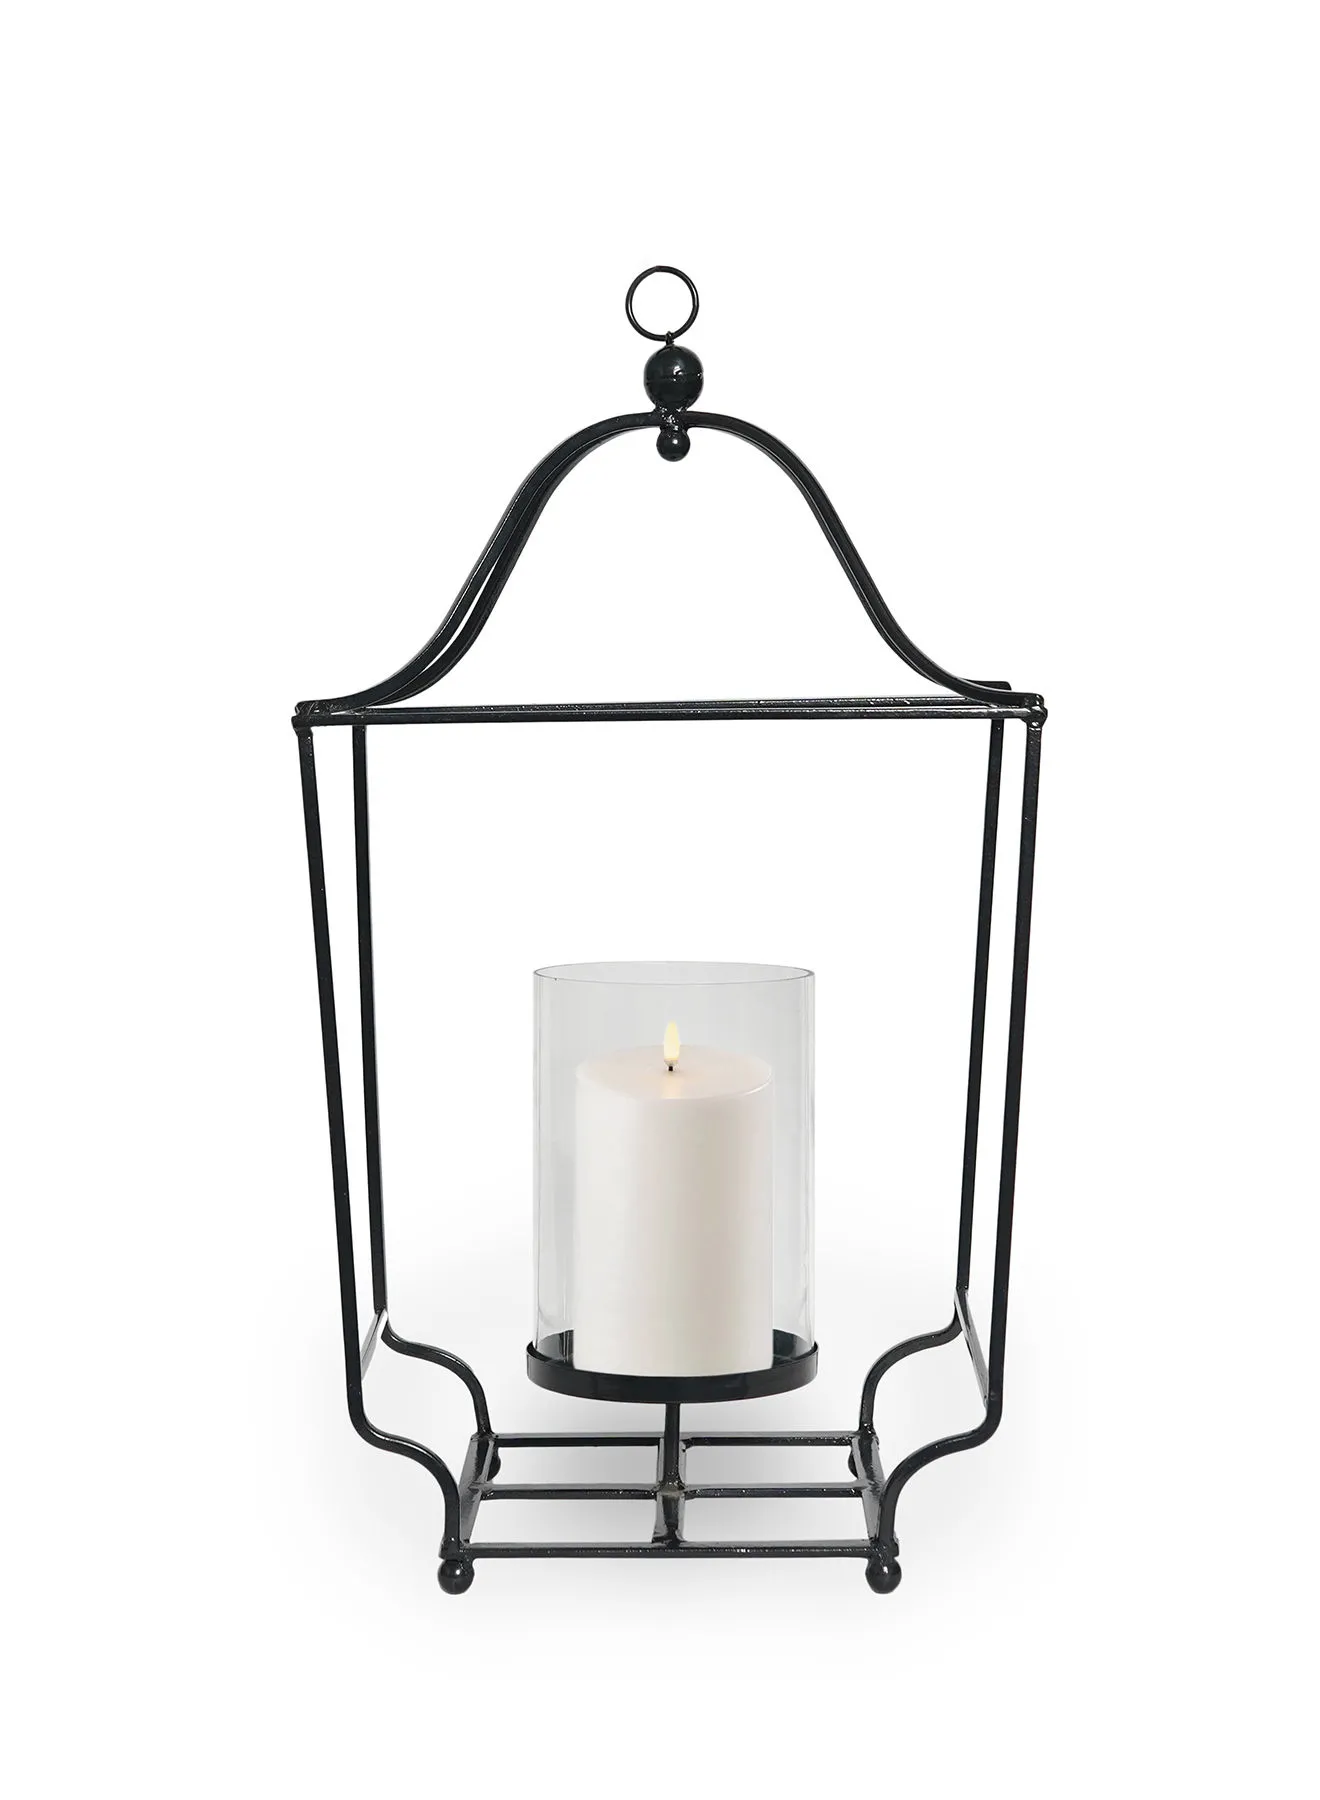 ebb & flow Modern Ideal Design Handmade Lantern Unique Luxury Quality Scents For The Perfect Stylish Home Black 20X19X54centimeter